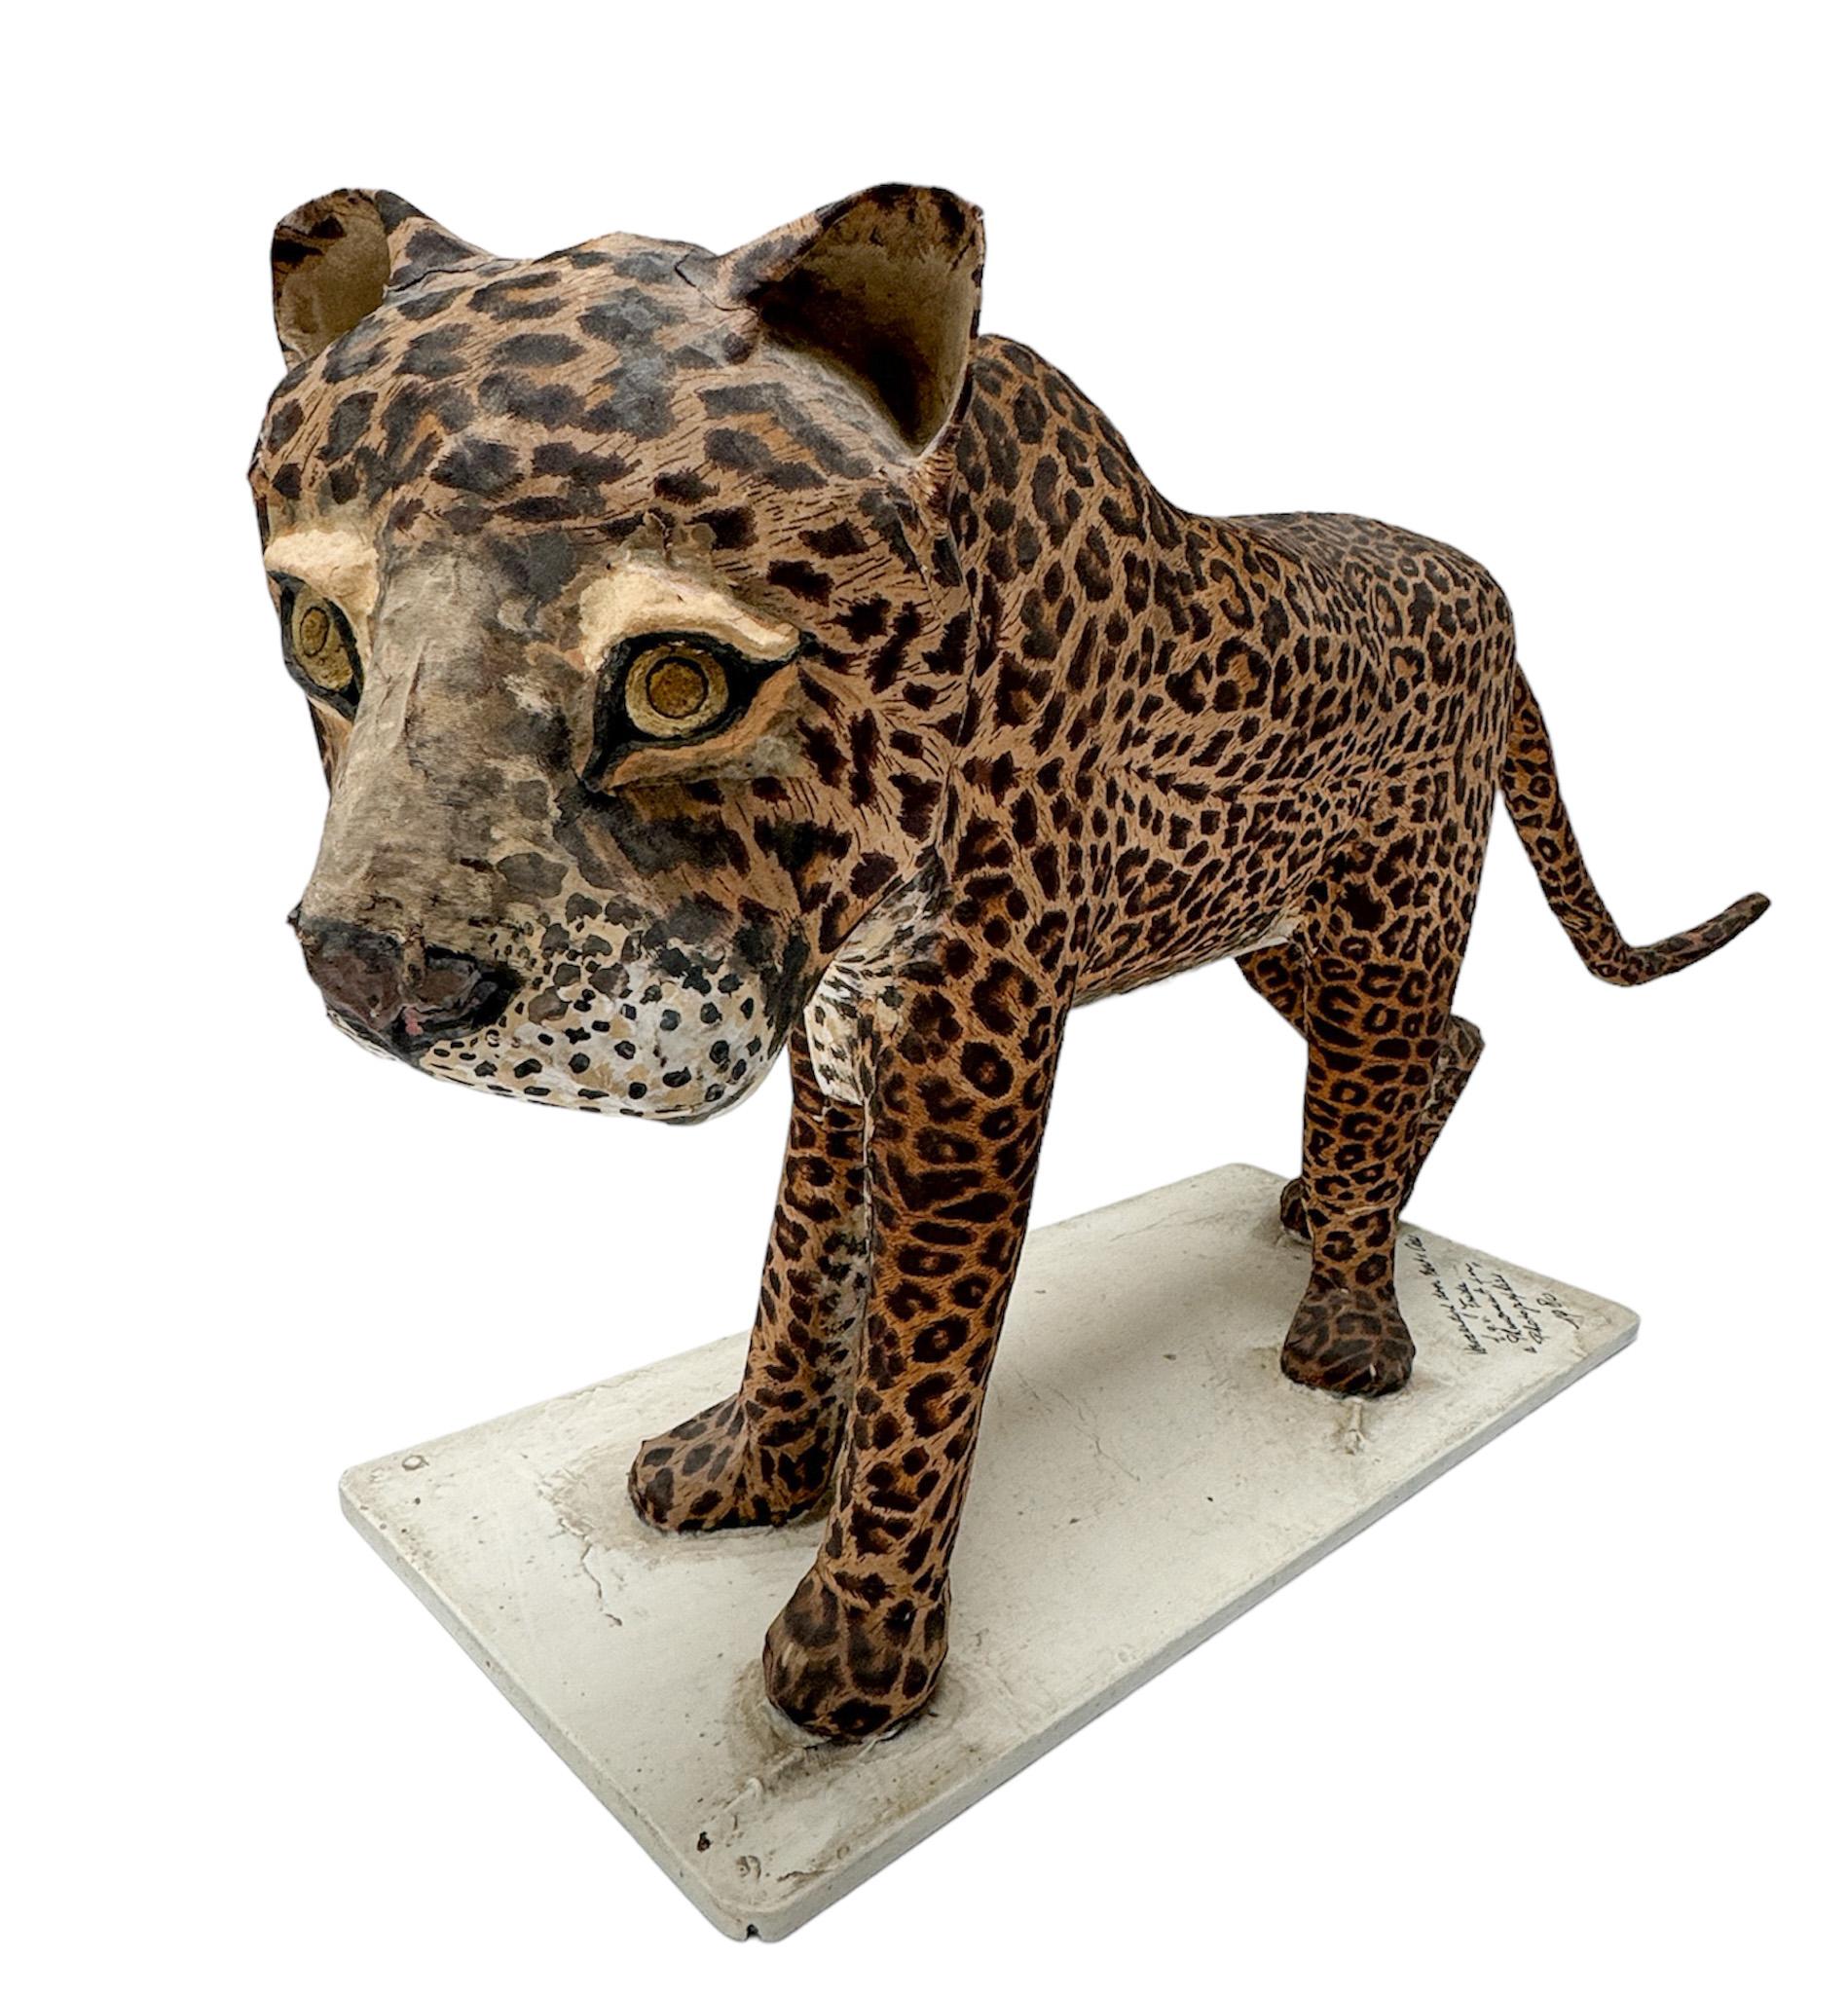 Stunning and rare one of a kind Mid-Century Modern sculpture of a leopard.
Design by Bert van Oers.
Striking Dutch design dated 1980.
Original hand-crafted and hand-painted paper machee sculpture on a painted wooden frame.
Marked with makers